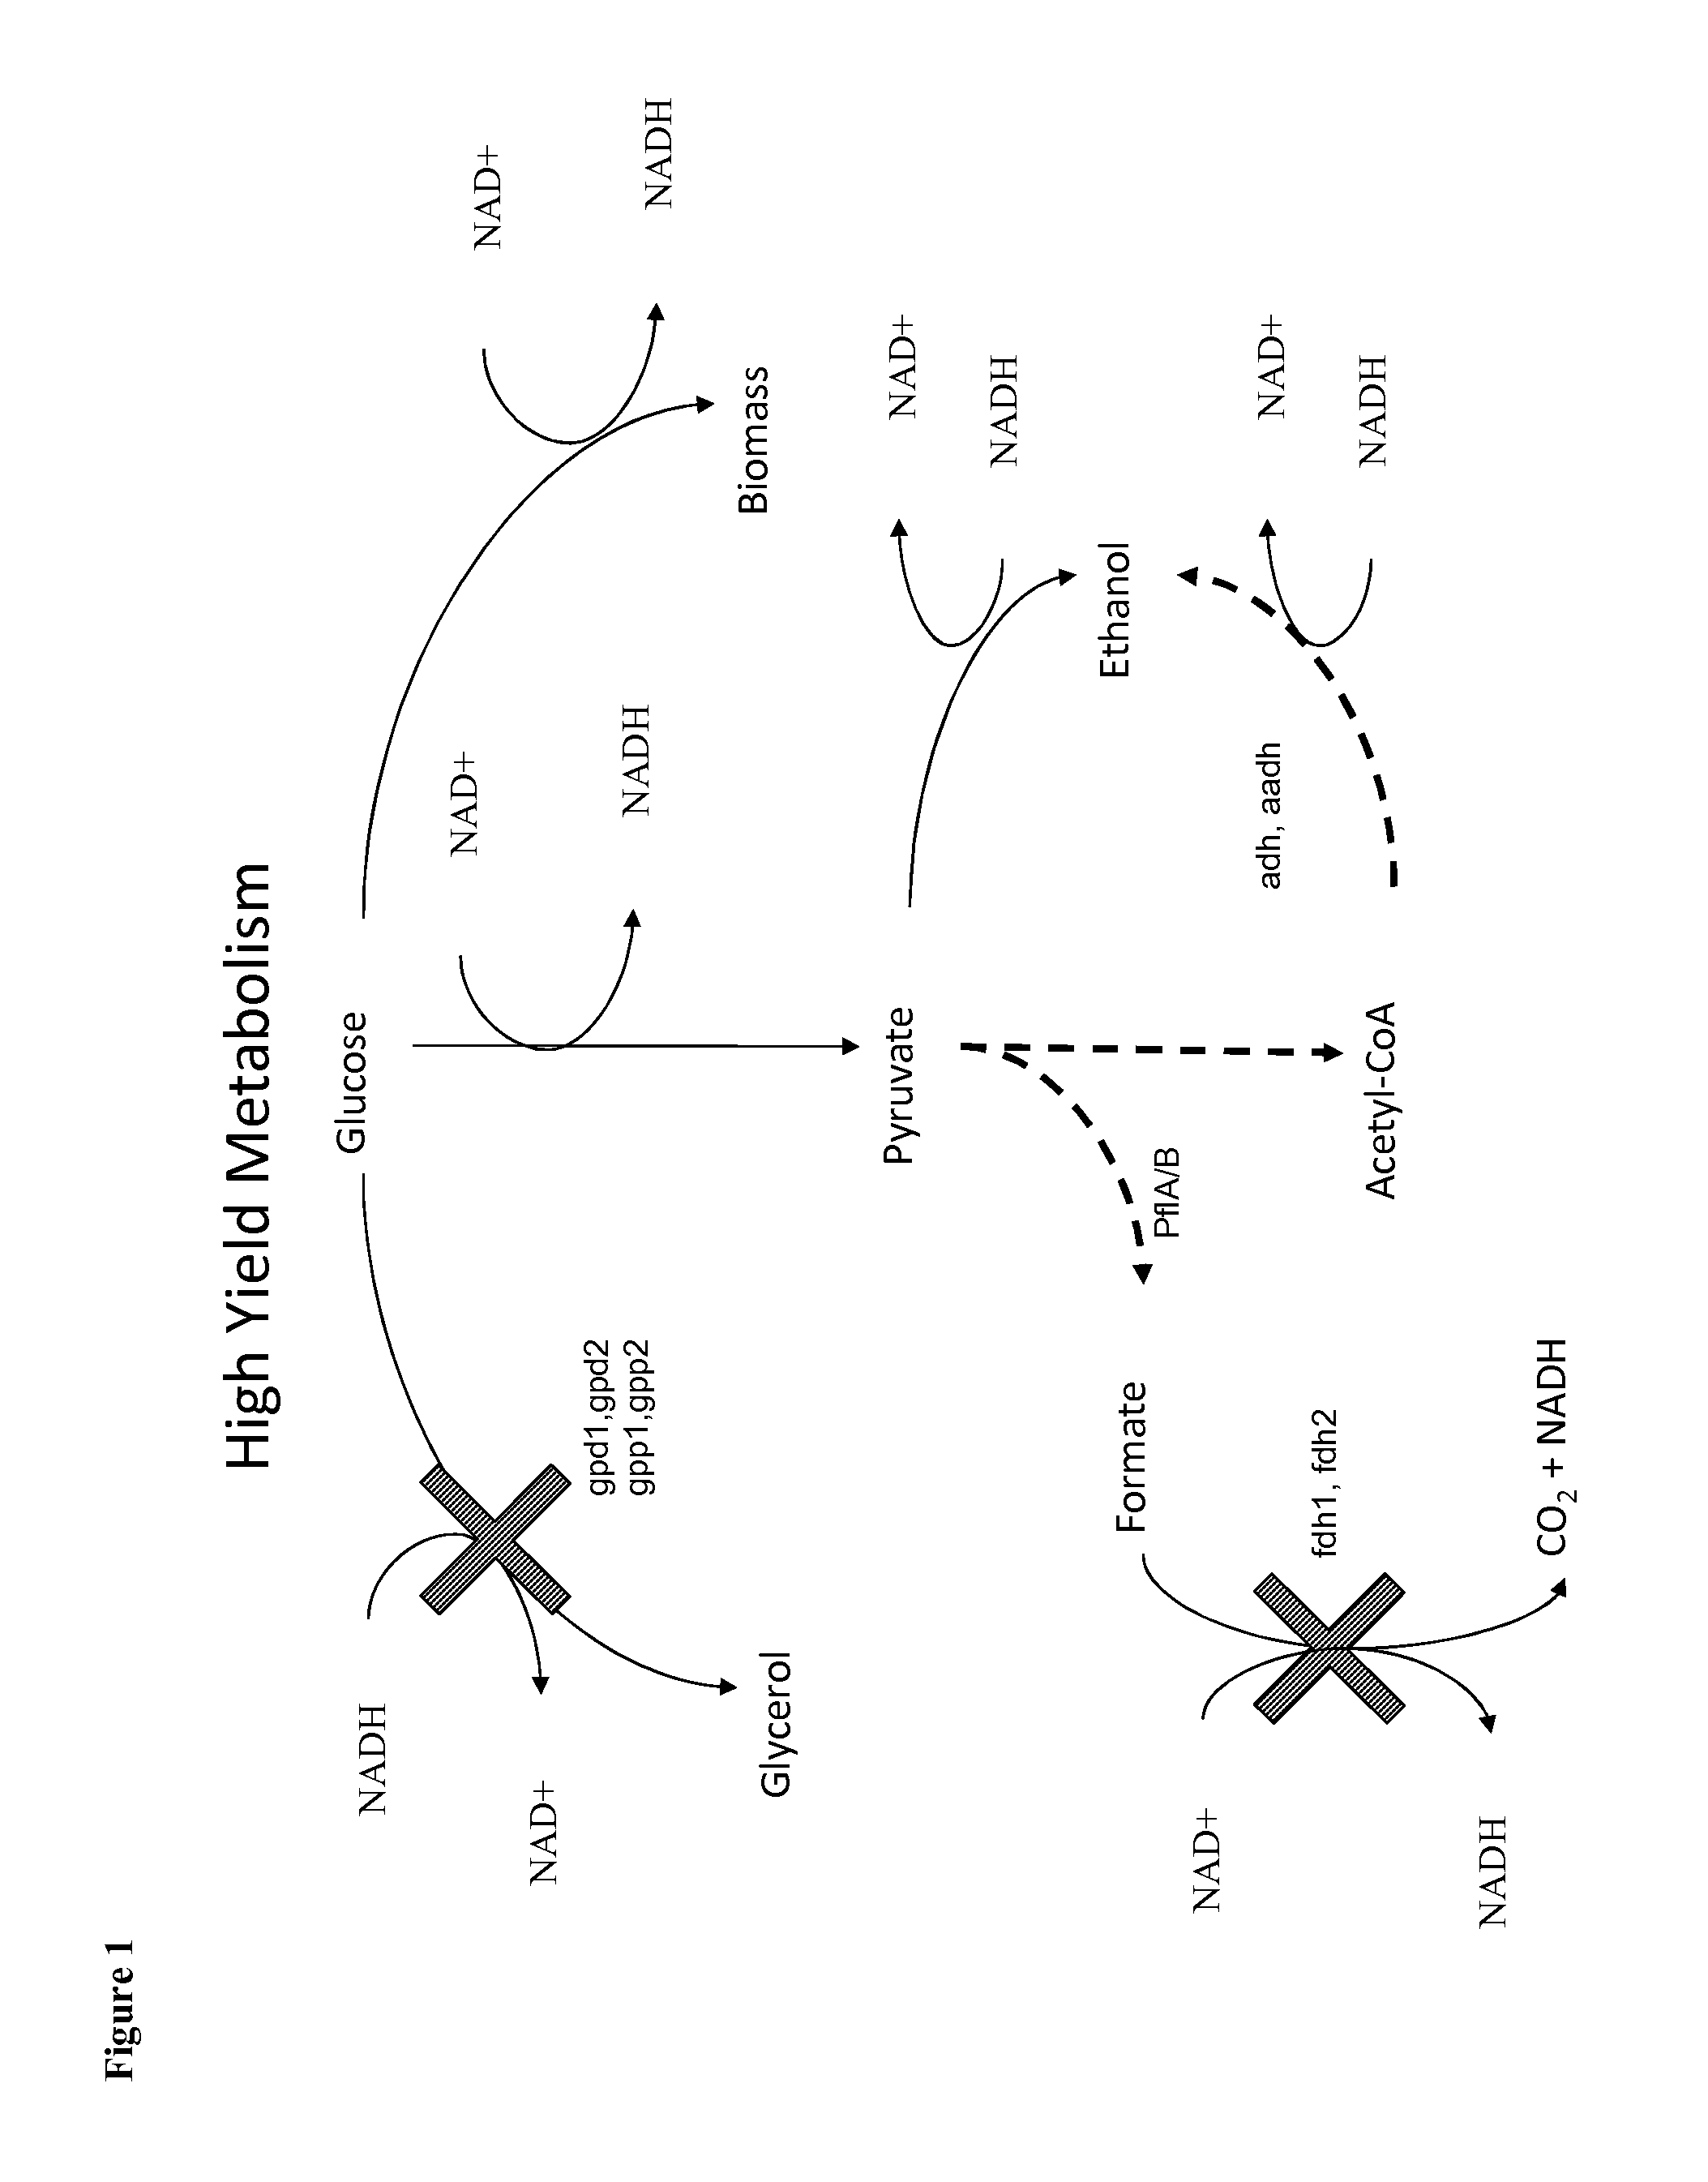 Methods for the improvement of product yield and production in a microorganism through the addition of alternate electron acceptors